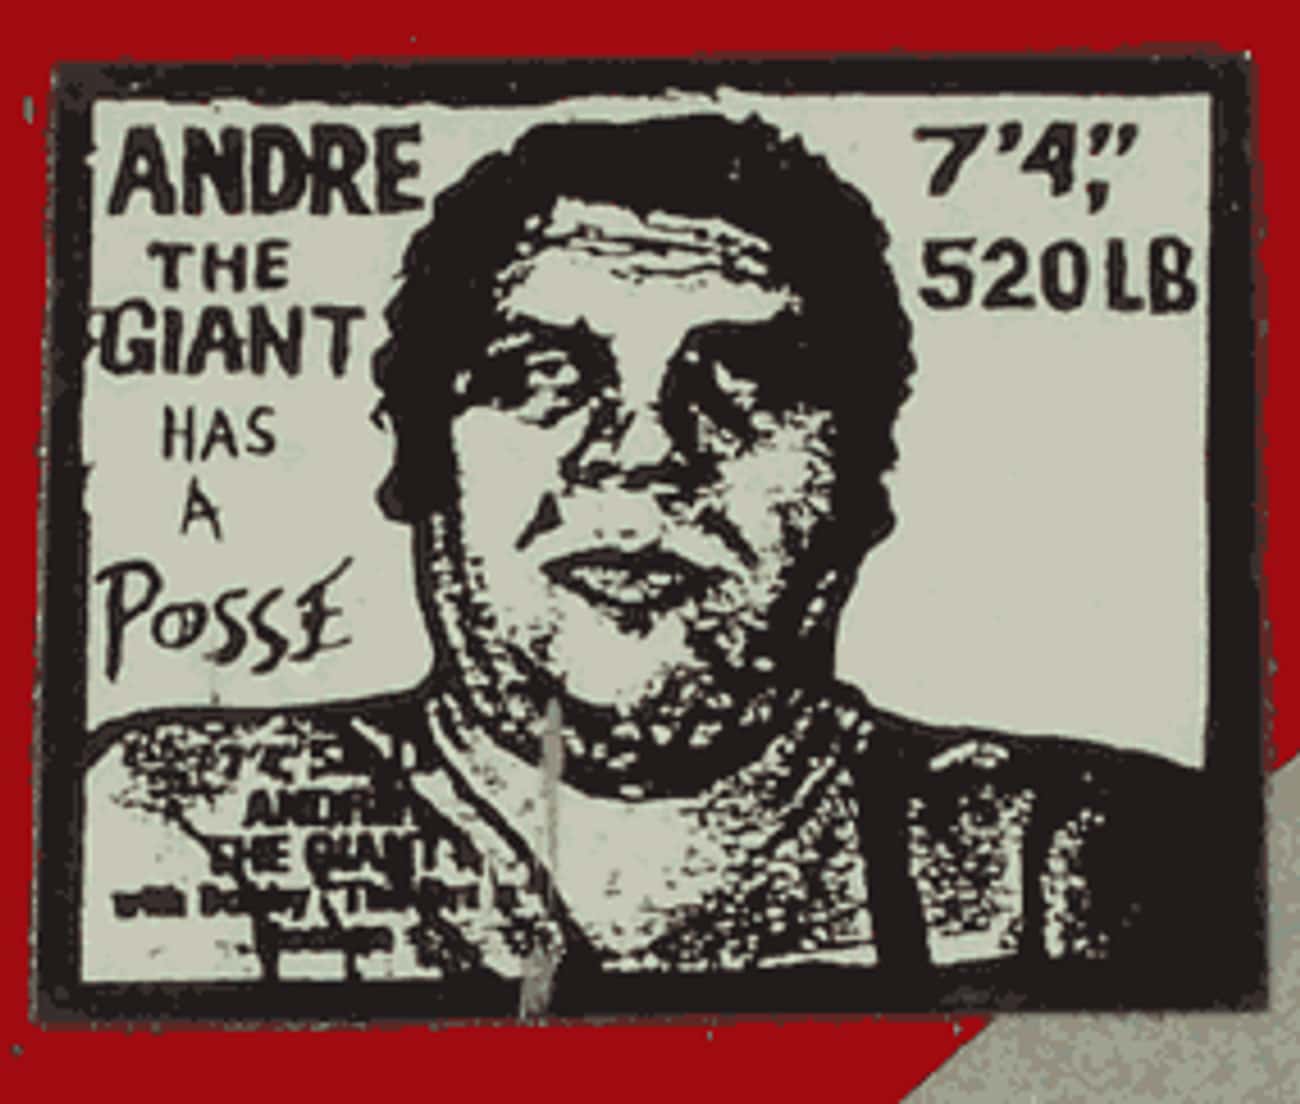 Andre the Giant Has a Posse